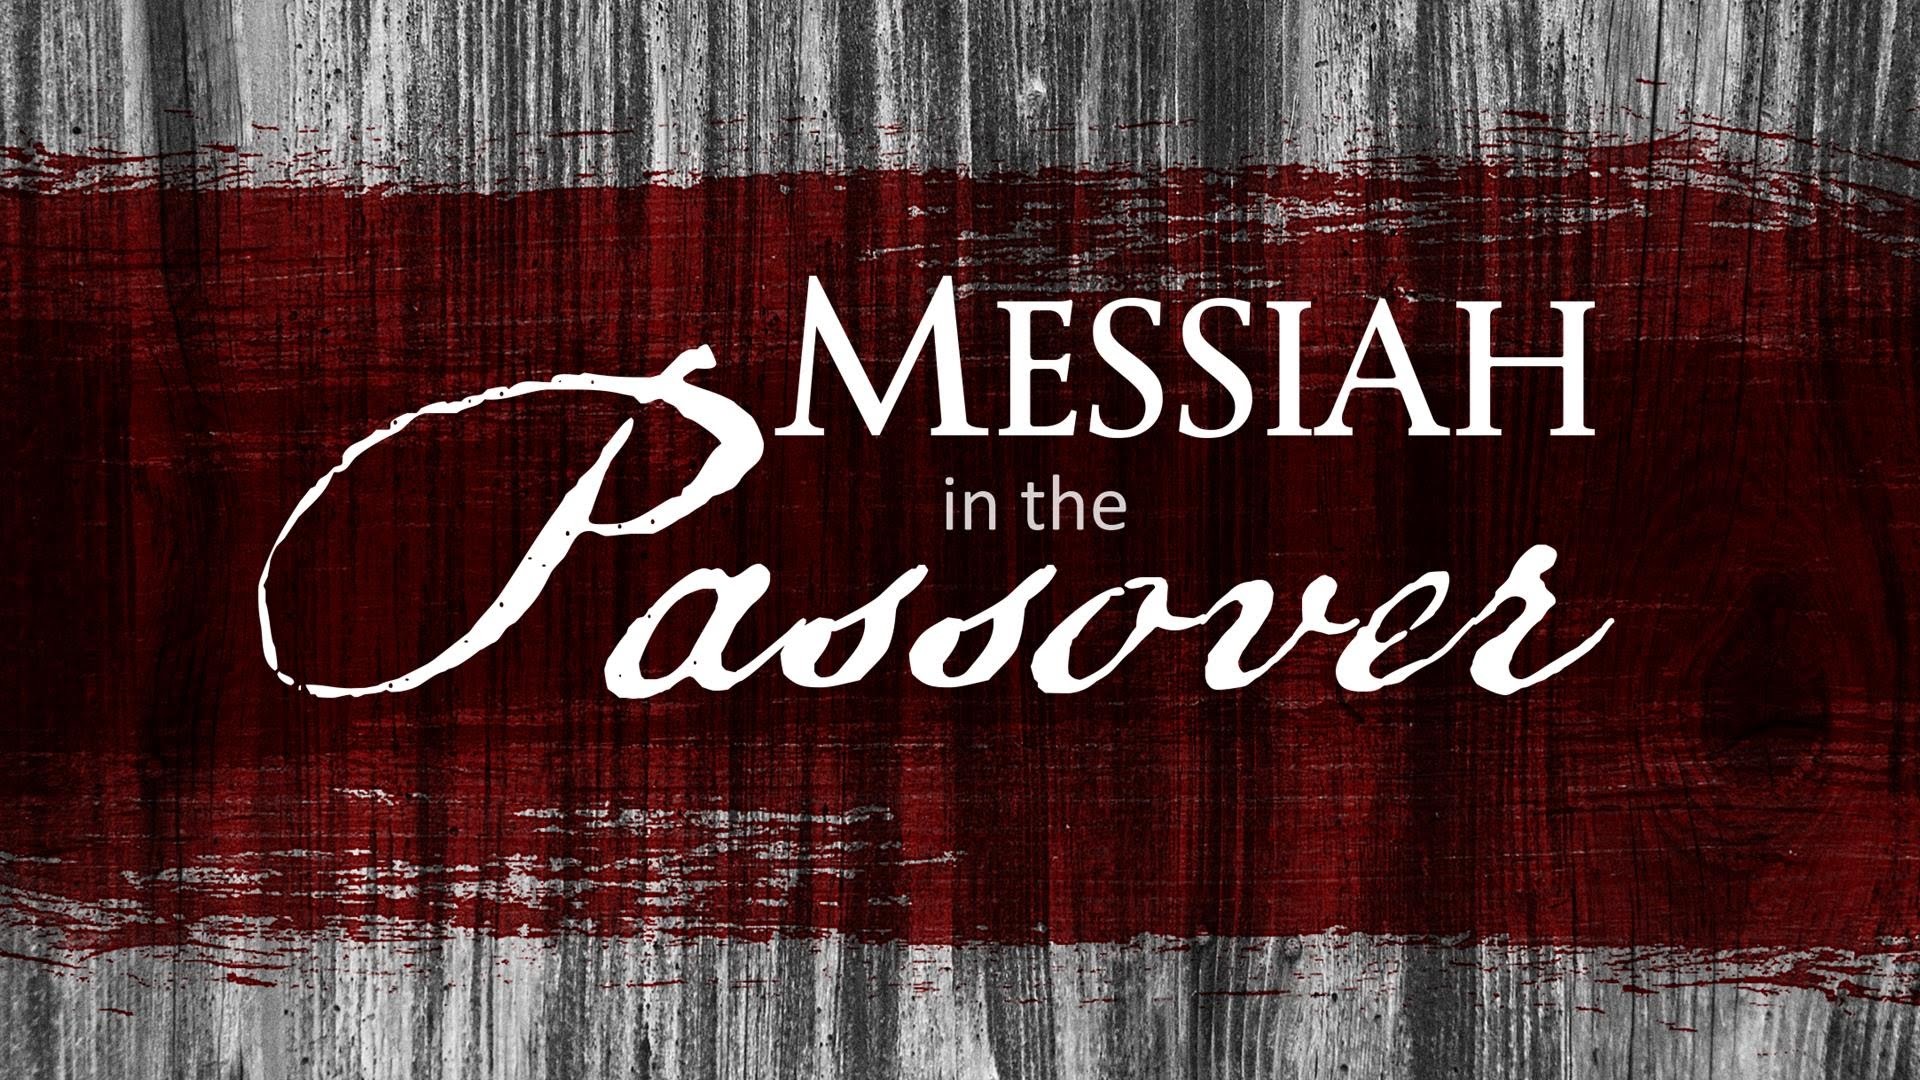 1920x1080 Passover Seder | "Messiah in the Passover" | 04-01-15 | Mitch Triestman